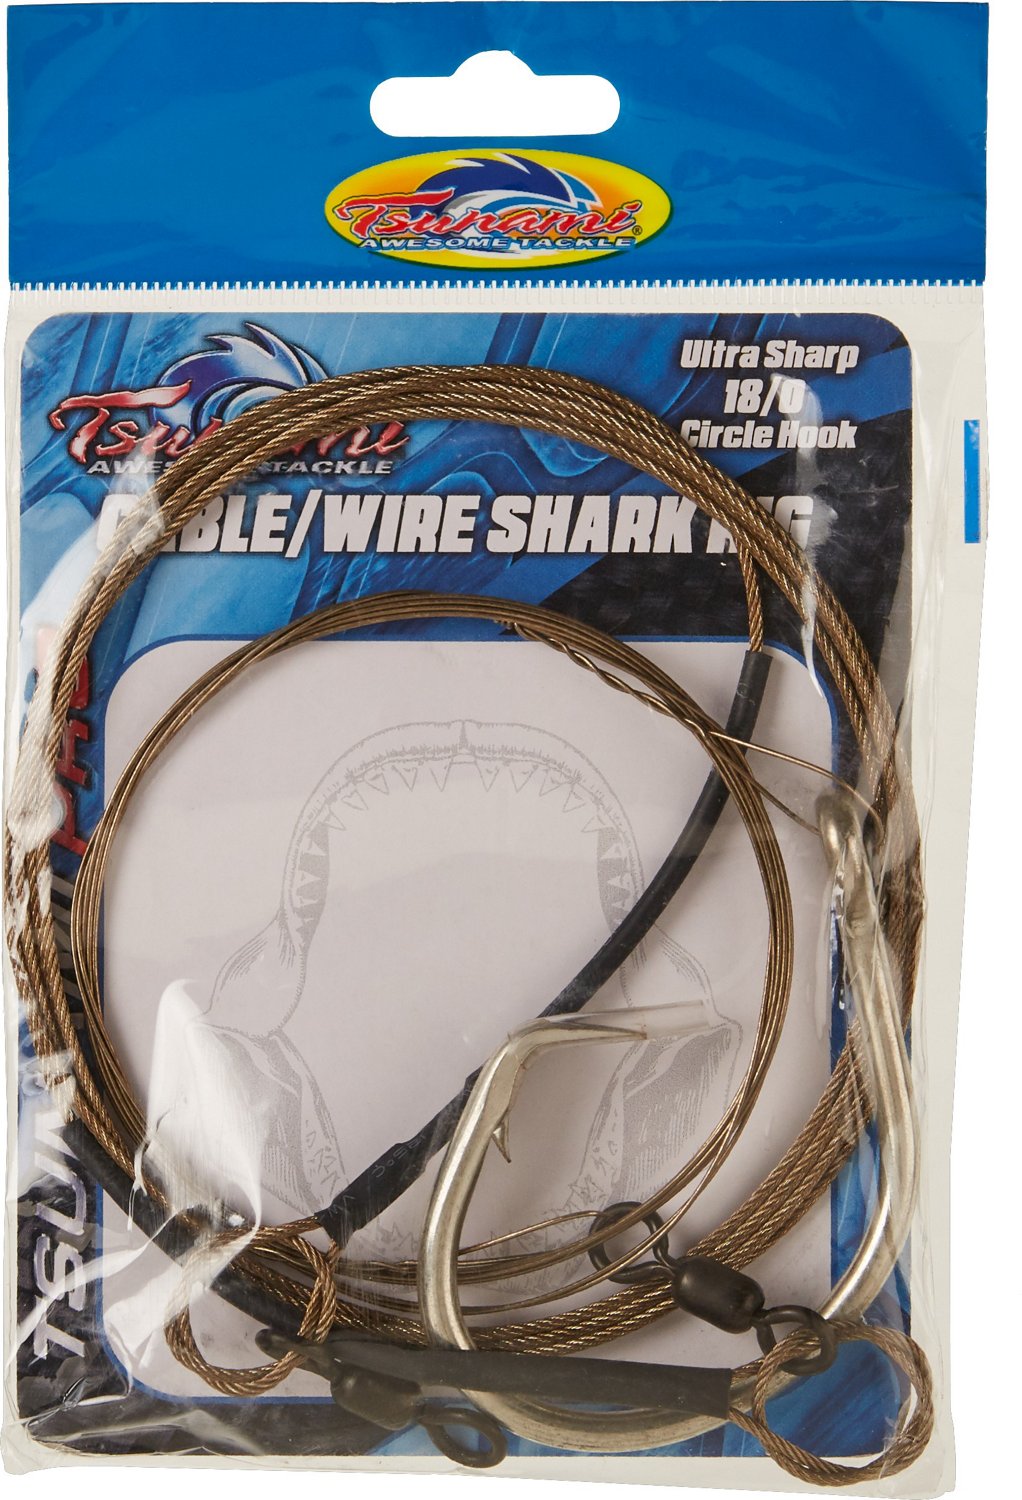 Academy Sports + Outdoors Tsunami Cable/Wire Shark Rig 18/0 Circle